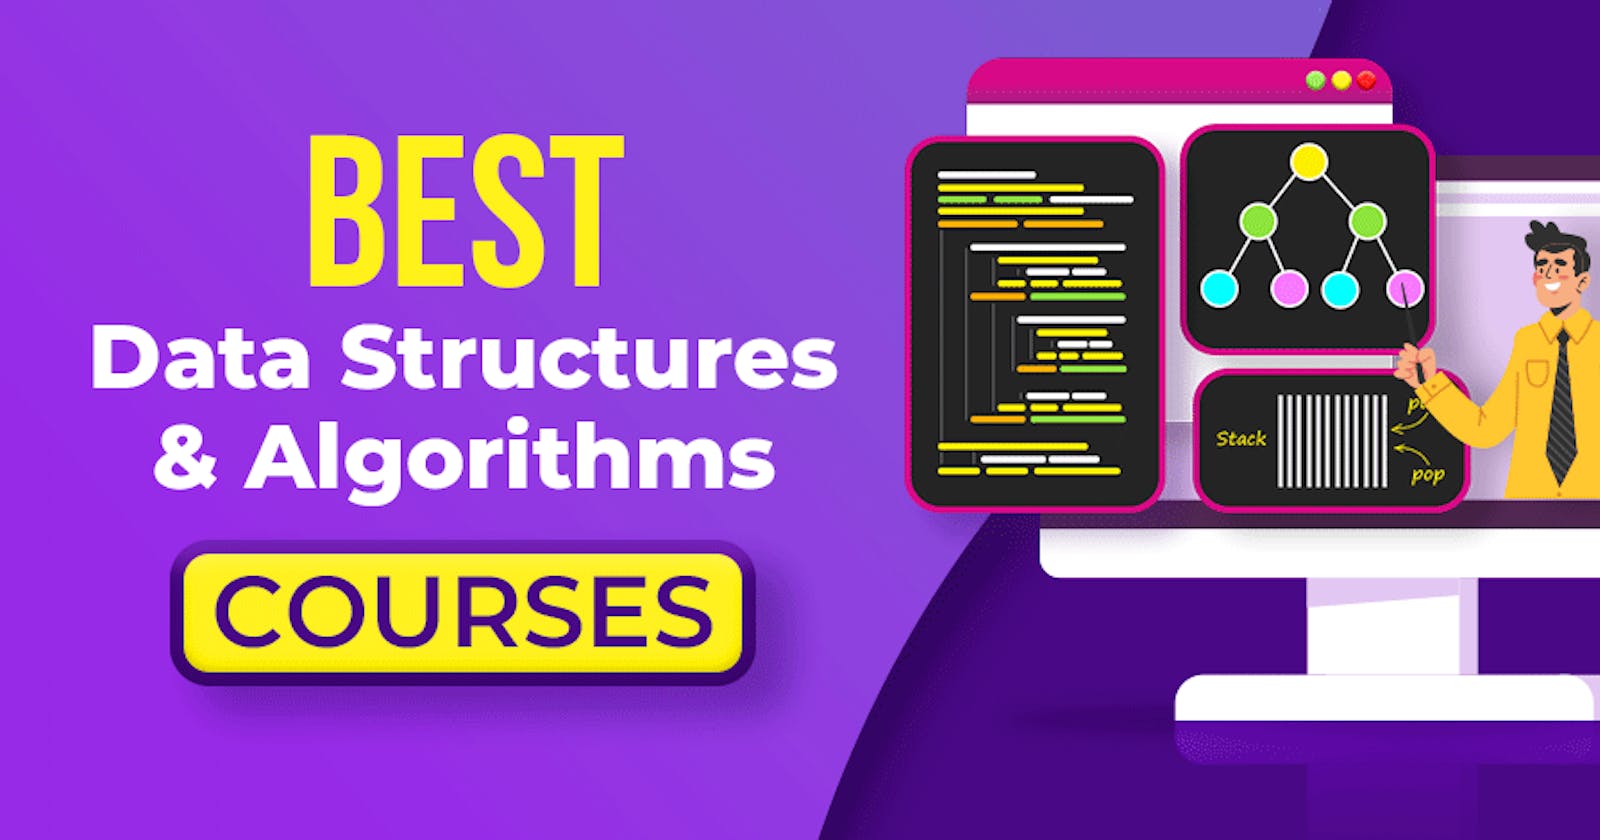 Does a full stack developer need data structures and algorithms?